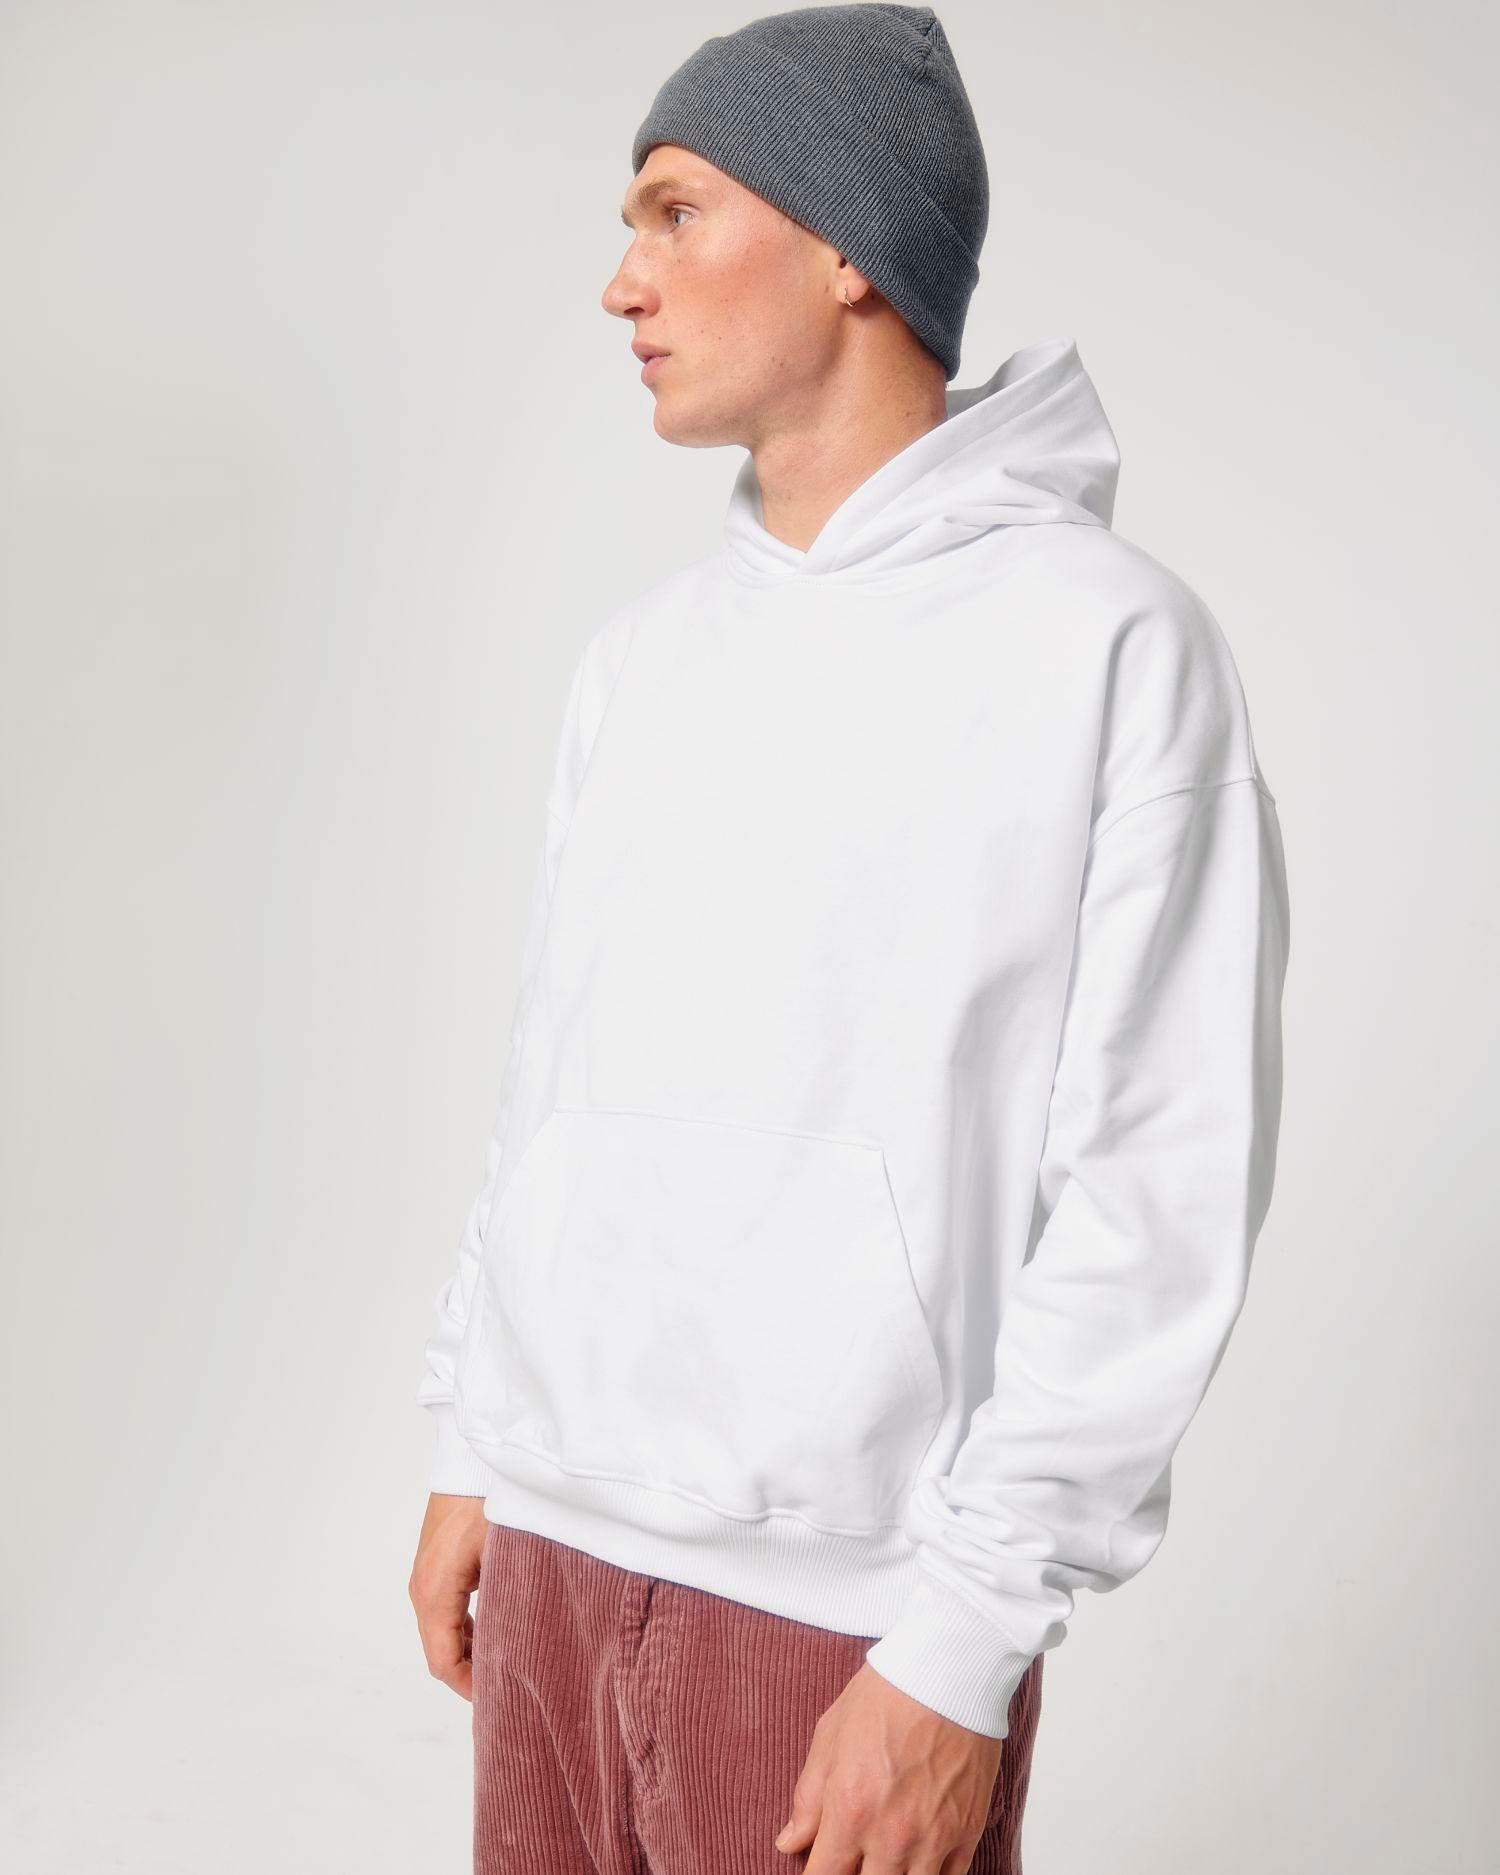 Sweatshirt Hoodie Unisexe Coupe Boxy Stanley Stella Cooper Dry | Personnalisable En Broderie Et Impression | White